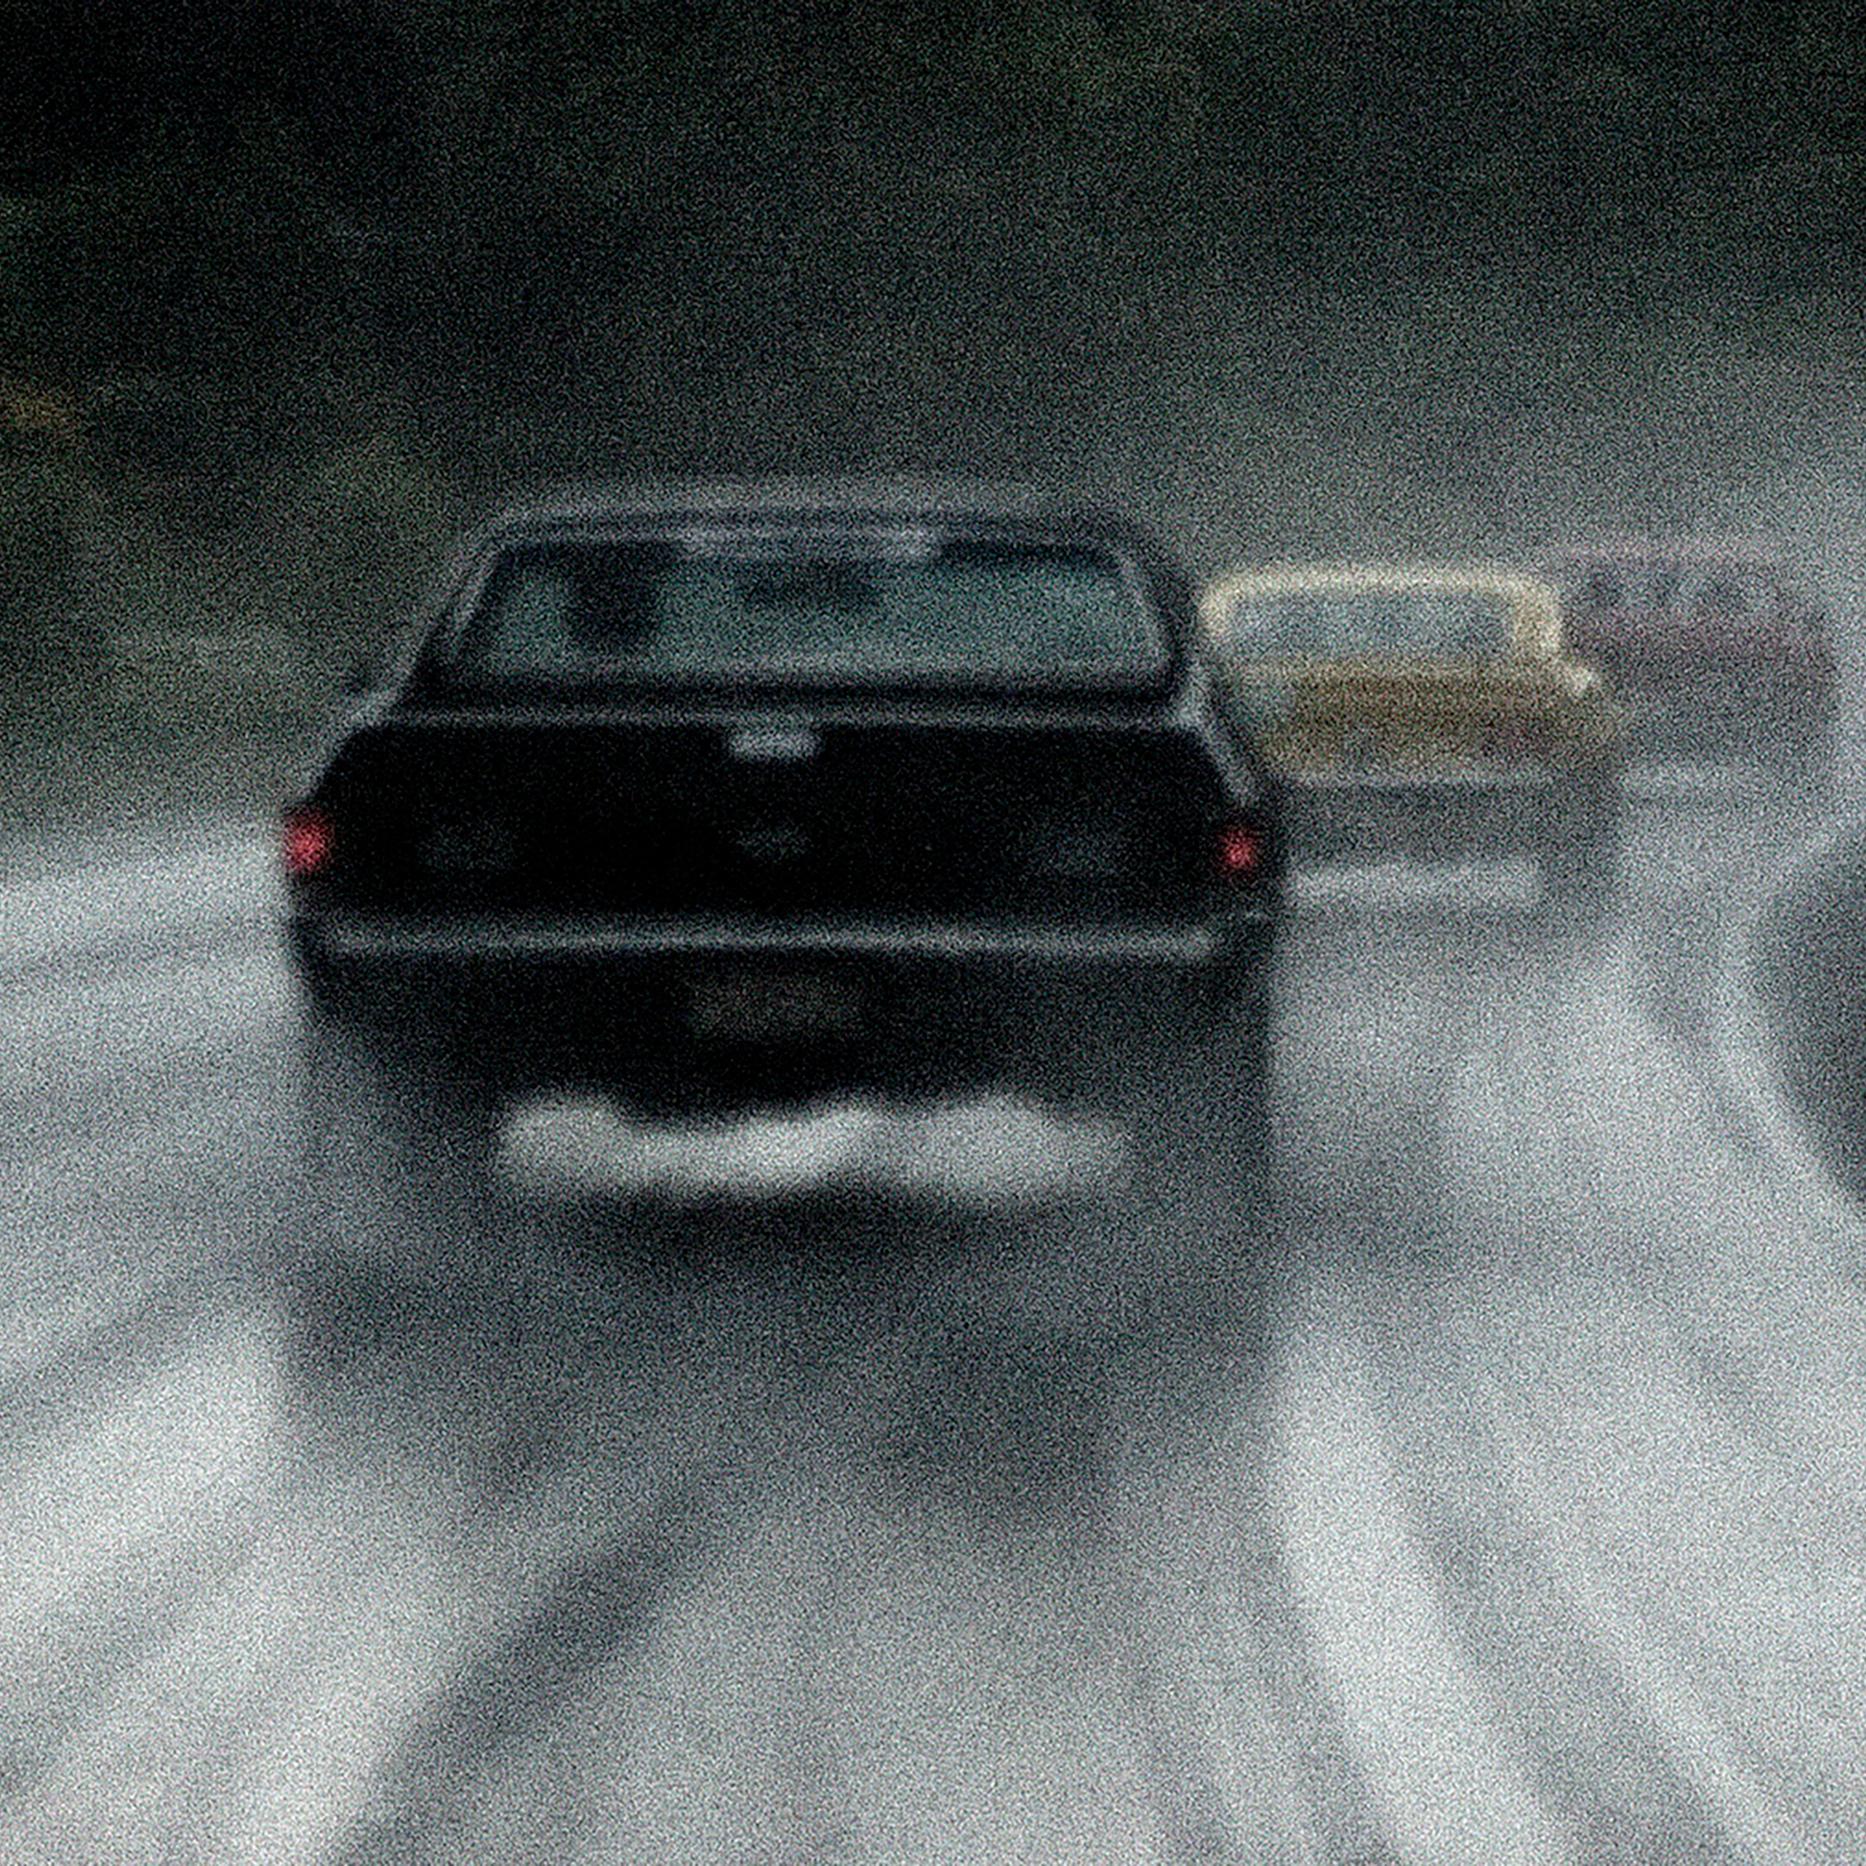 Heavy rain -Signed limited edition archival pigment print, Contemporary photo, USA - Photograph by Geoff Halpin